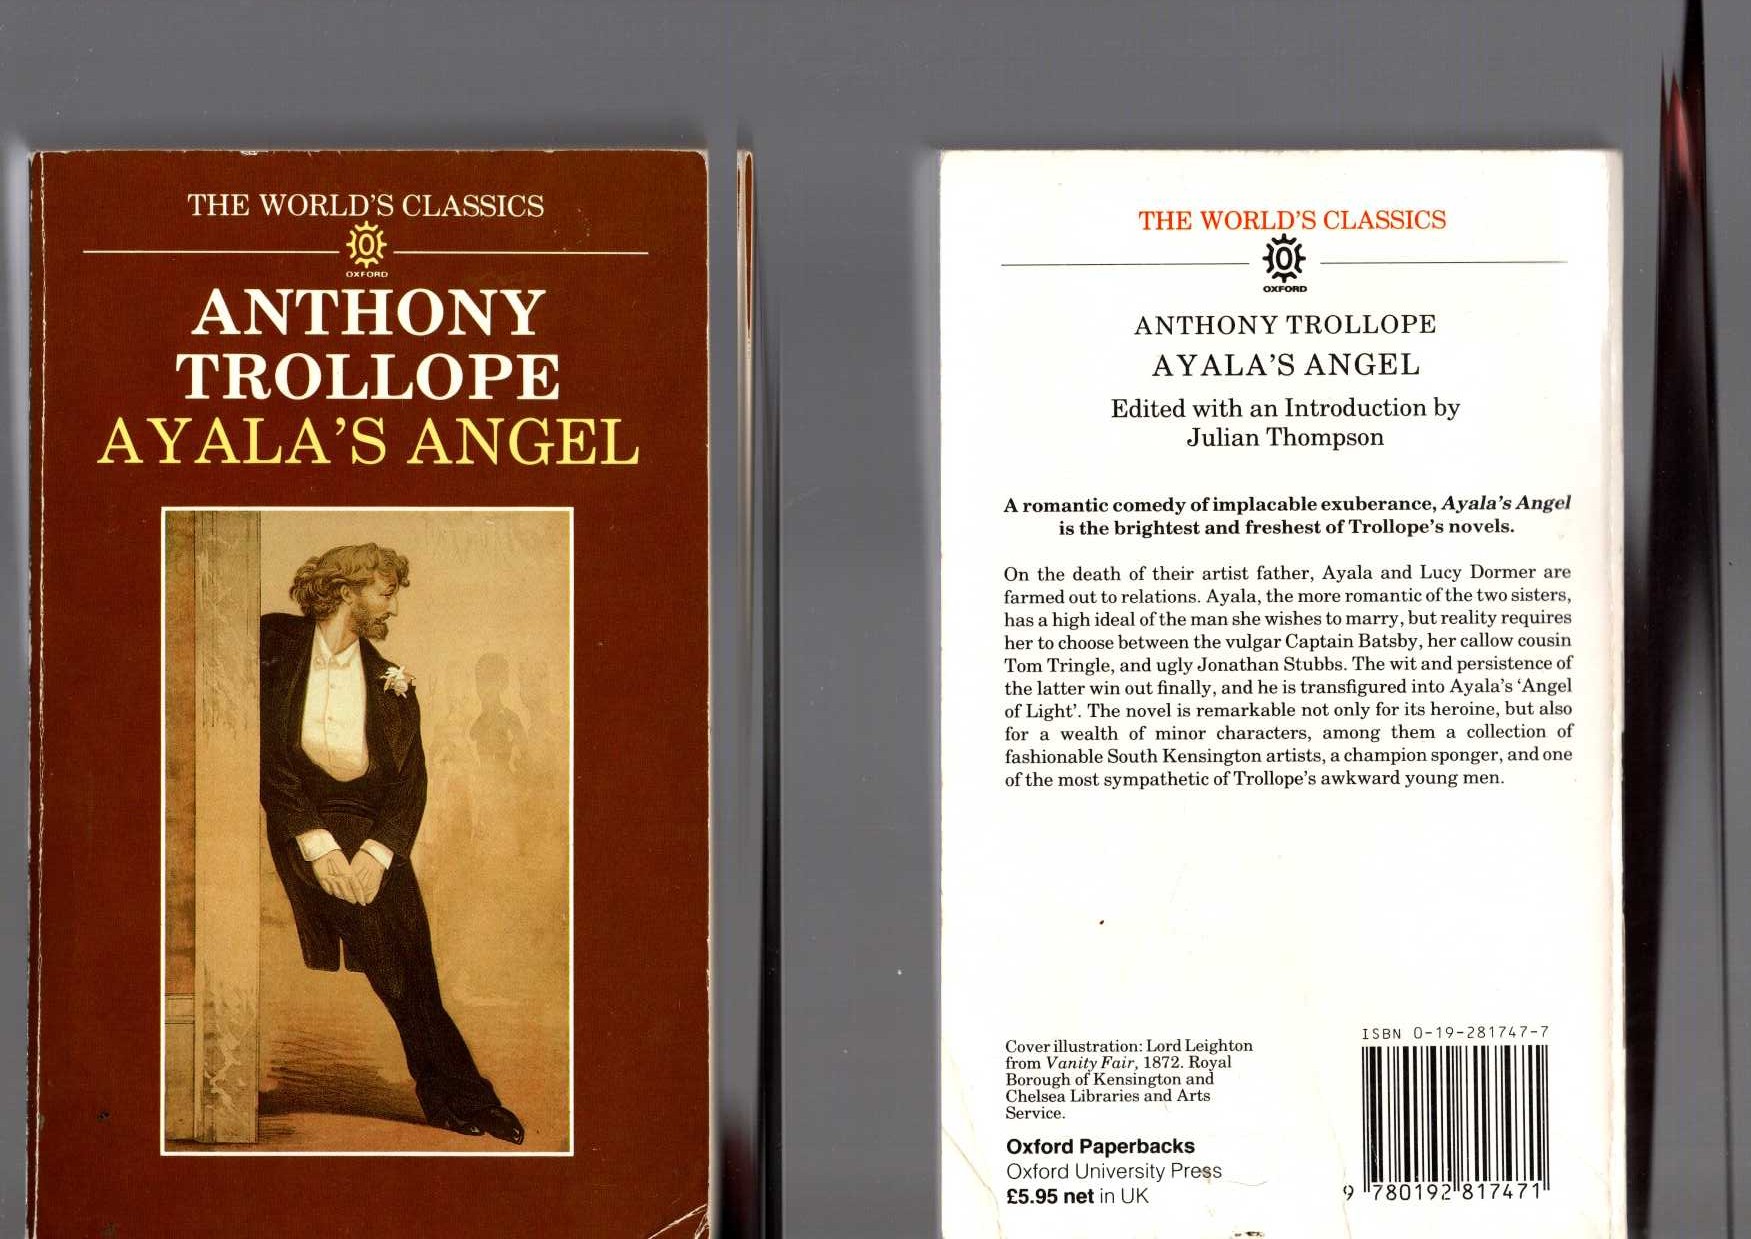 Anthony Trollope  AYALA'S ANGEL magnified rear book cover image